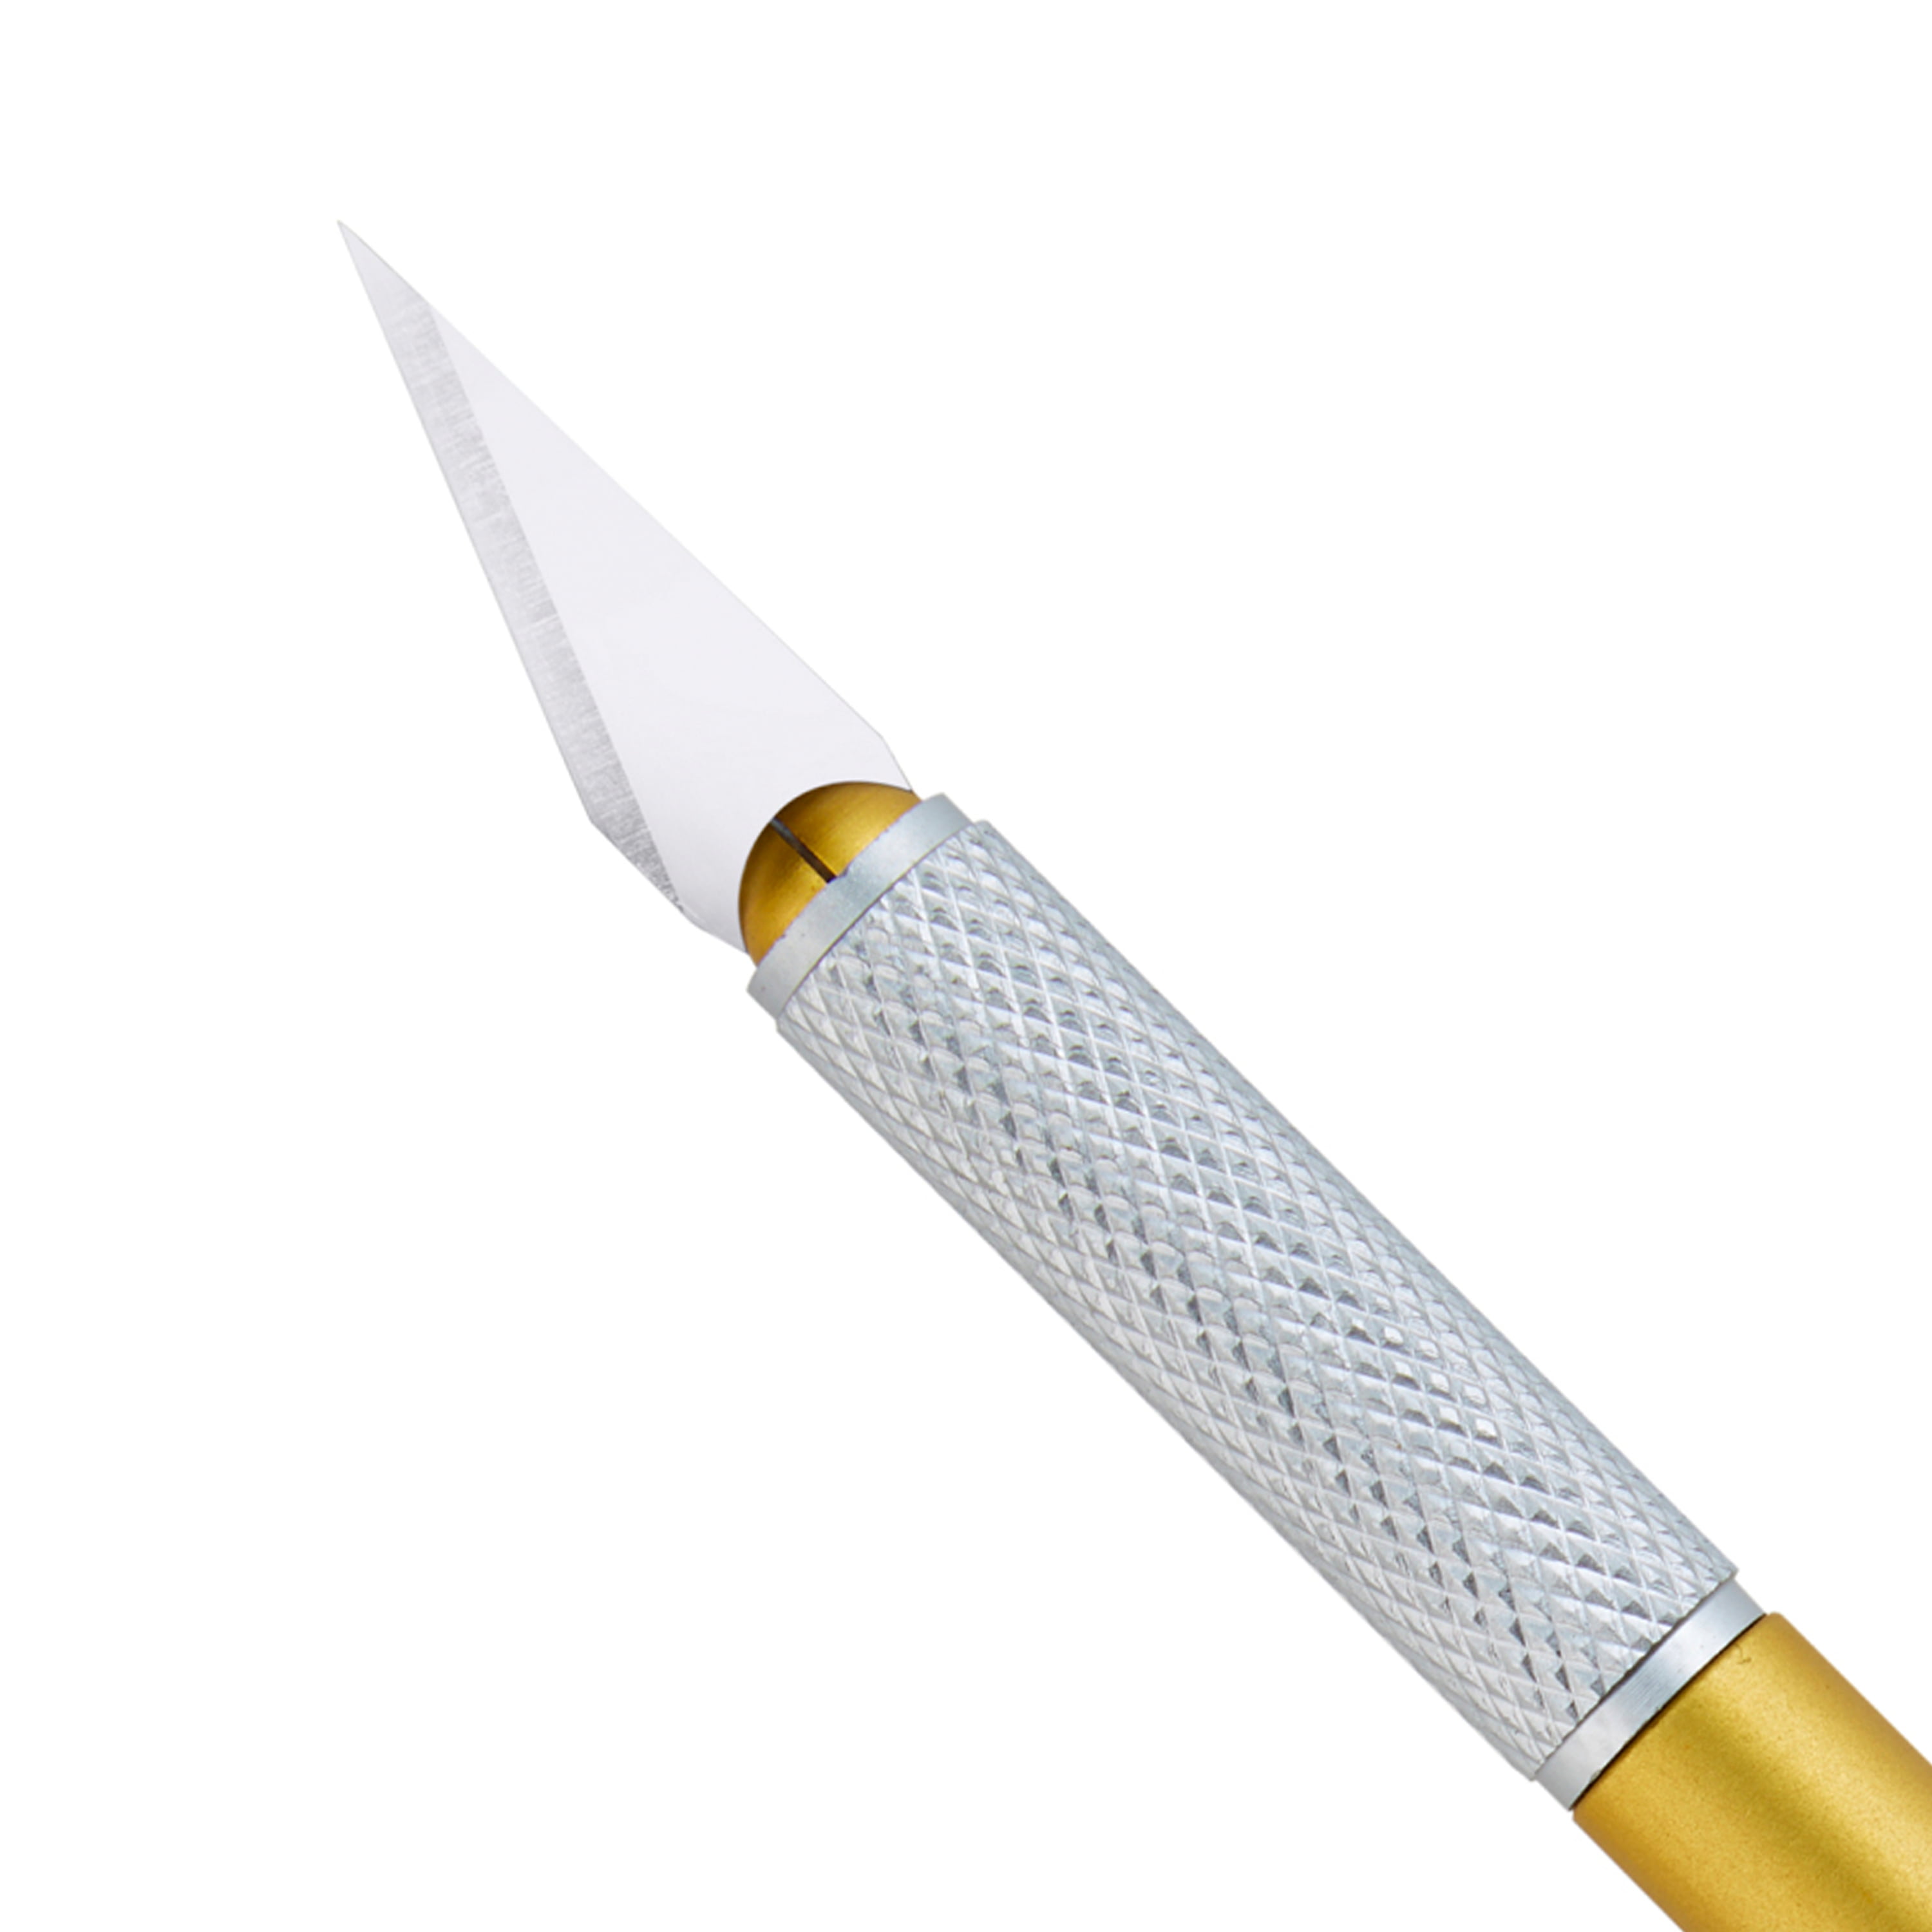 Westcott Carbo Titanium Craft Knife, for Office/Craft, Gold, 1-Count 